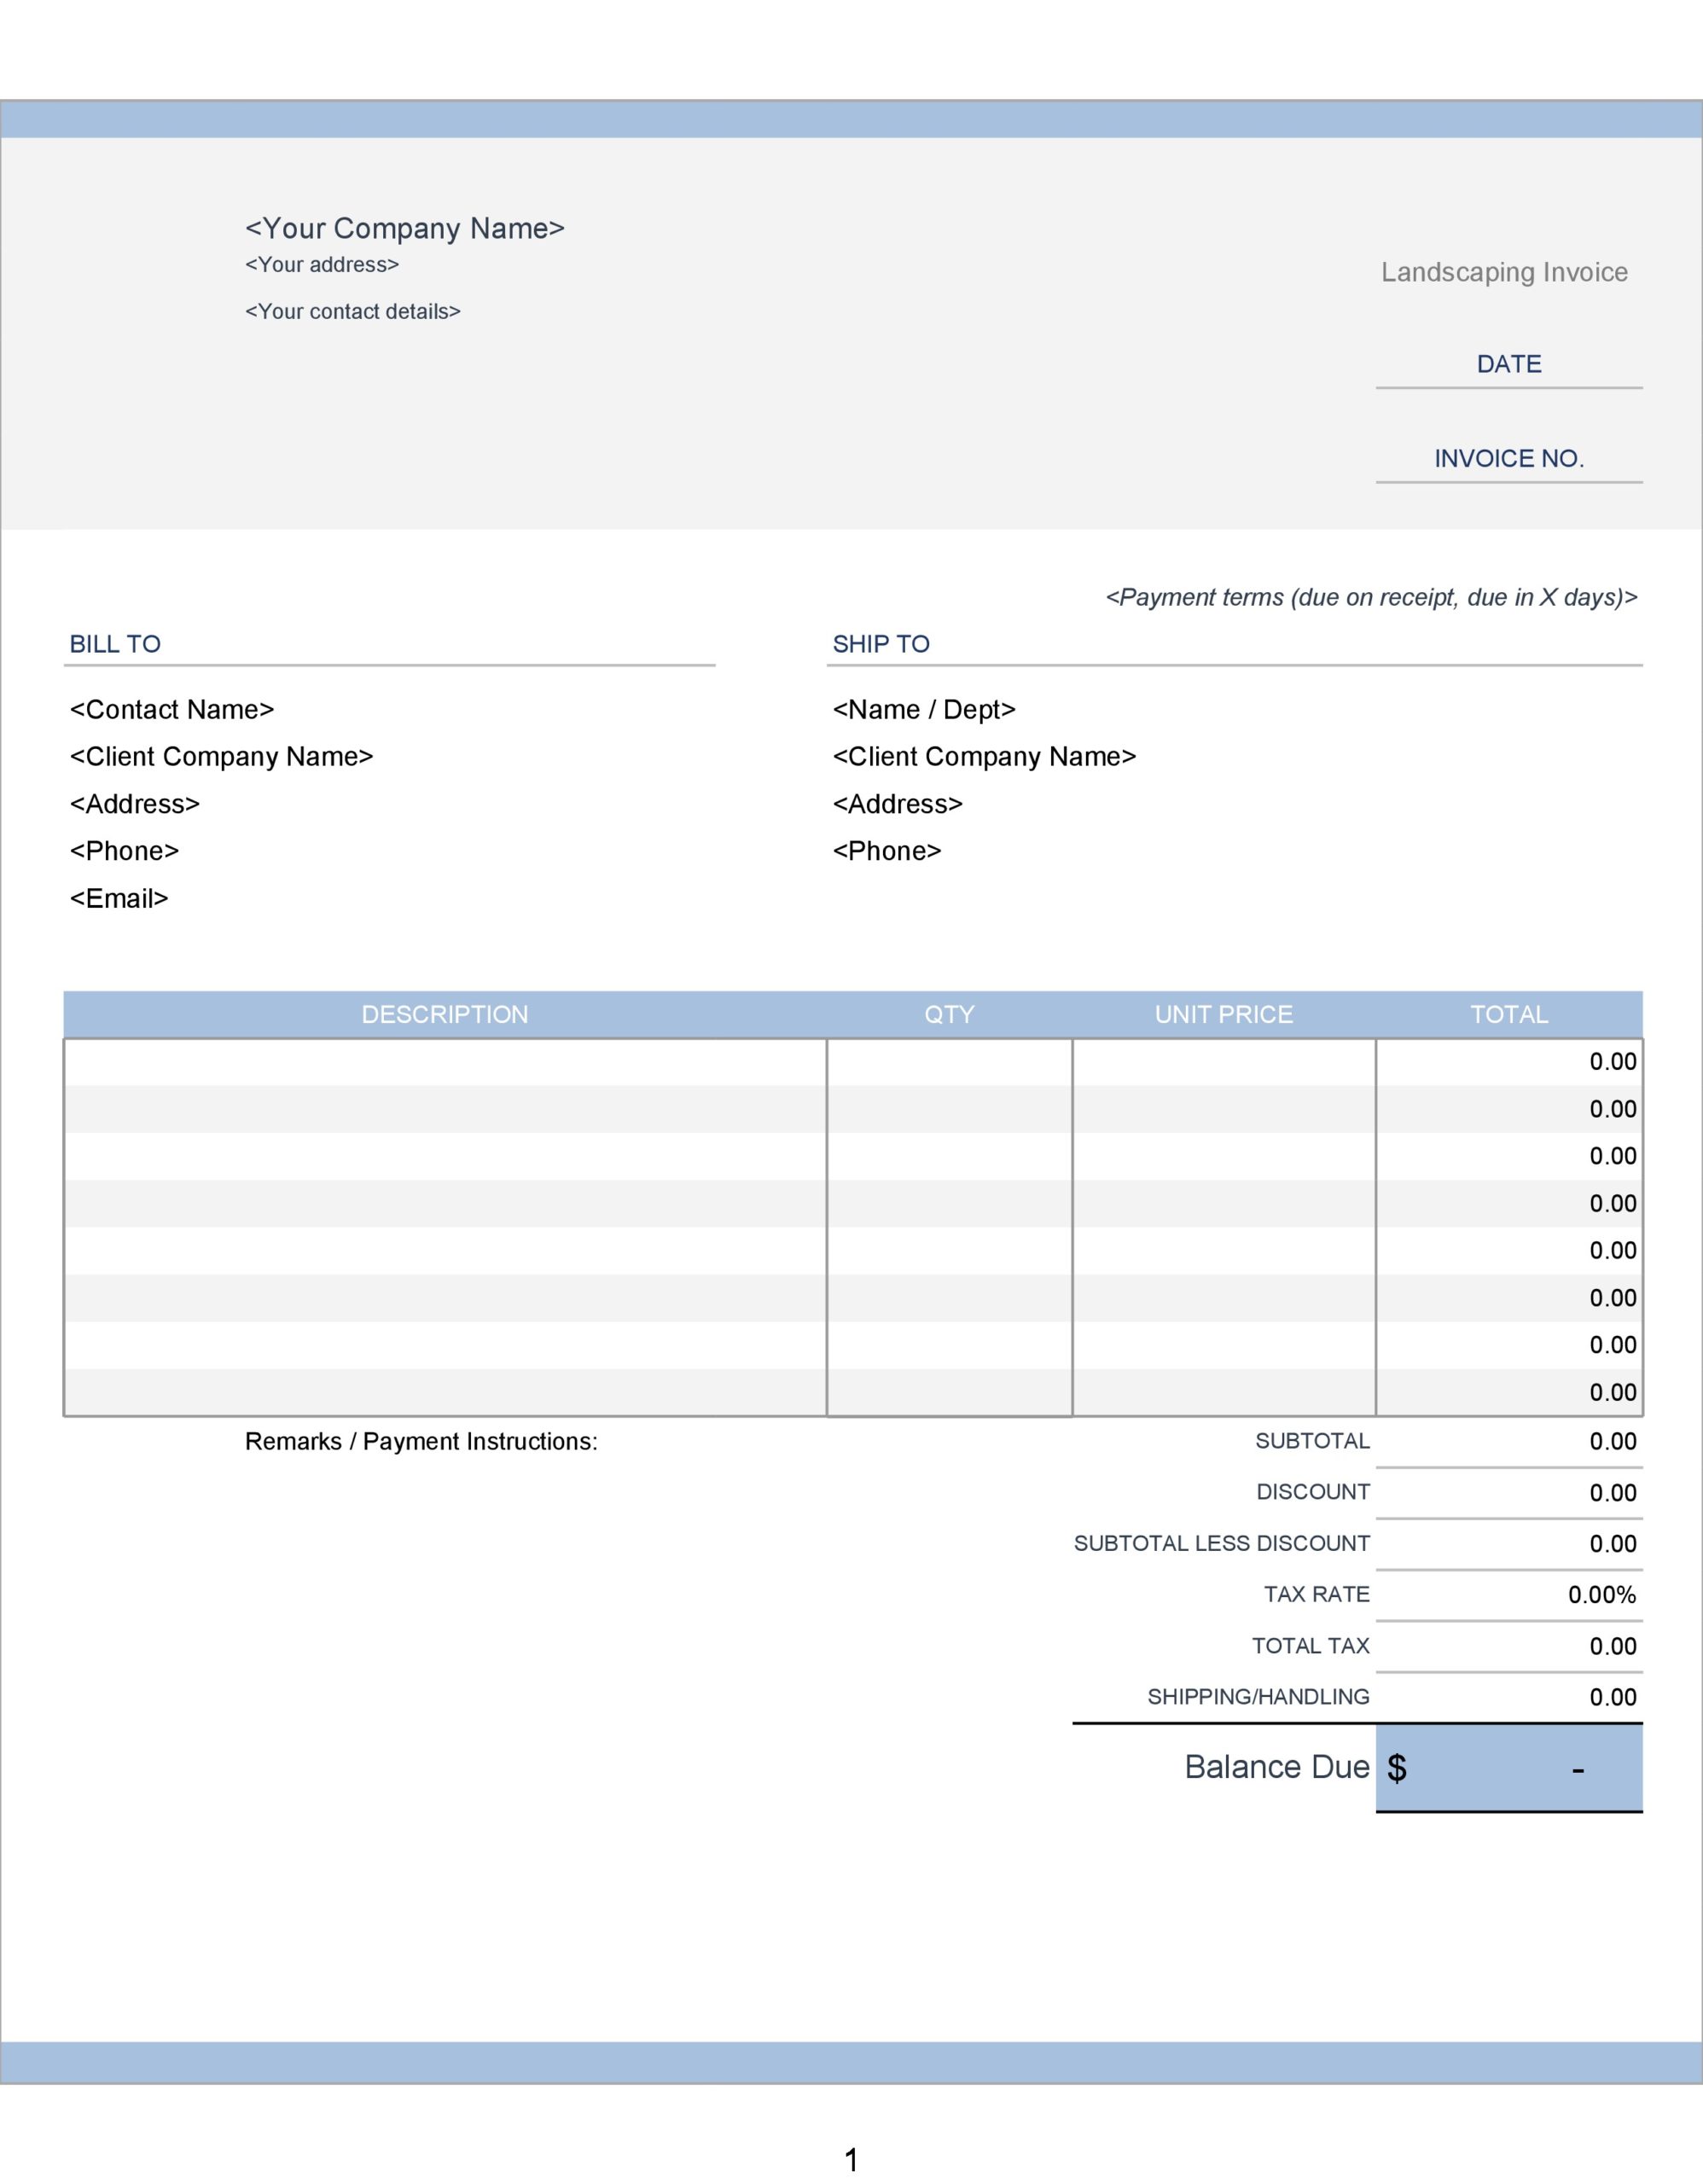 Free landscaping invoice 38